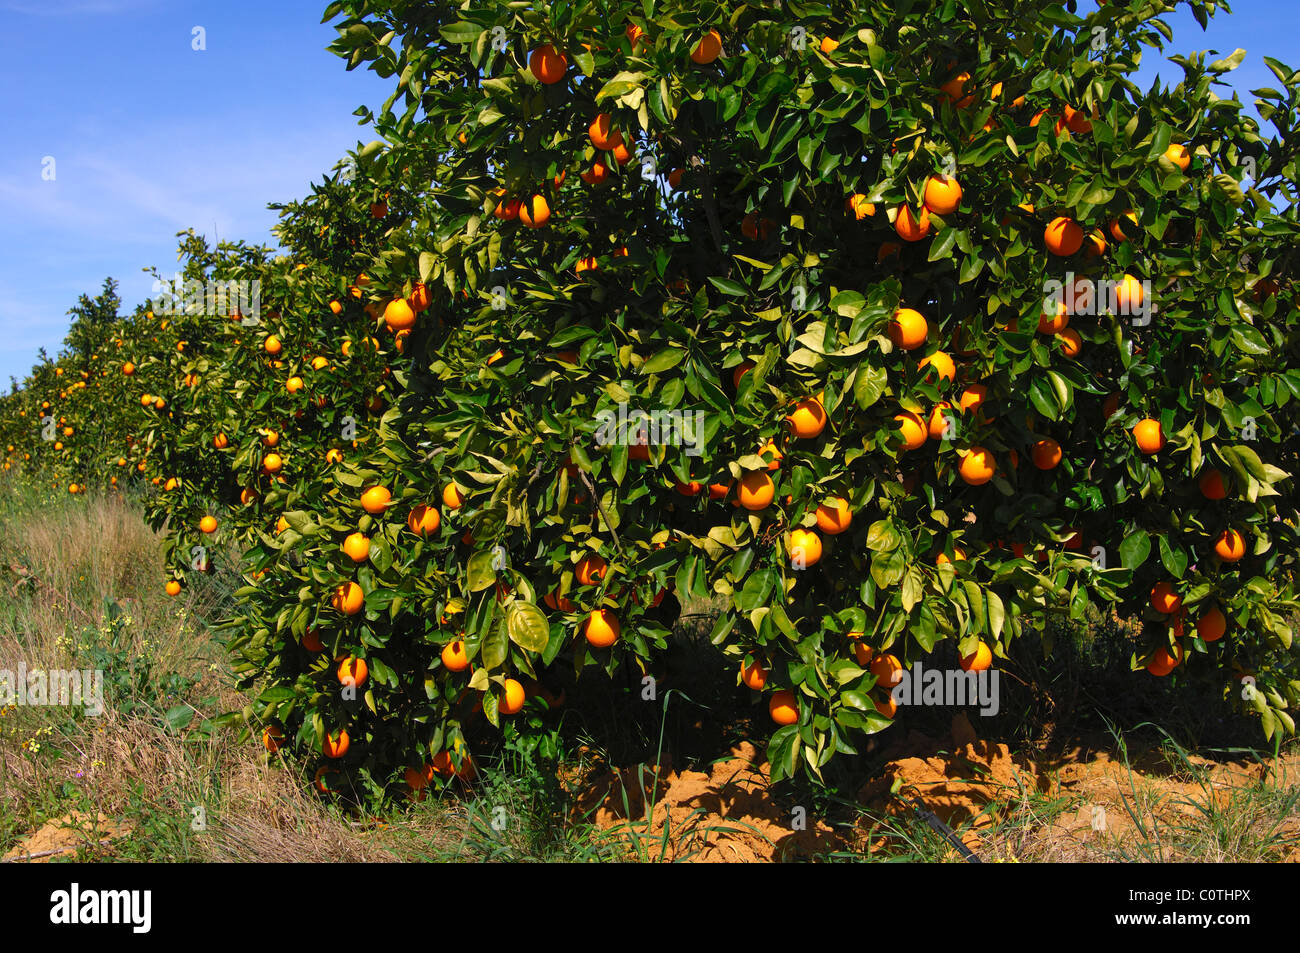 Orange tree with ripe fruits on a plantation in Citrusdal, Western Cape province, South Africa Stock Photo